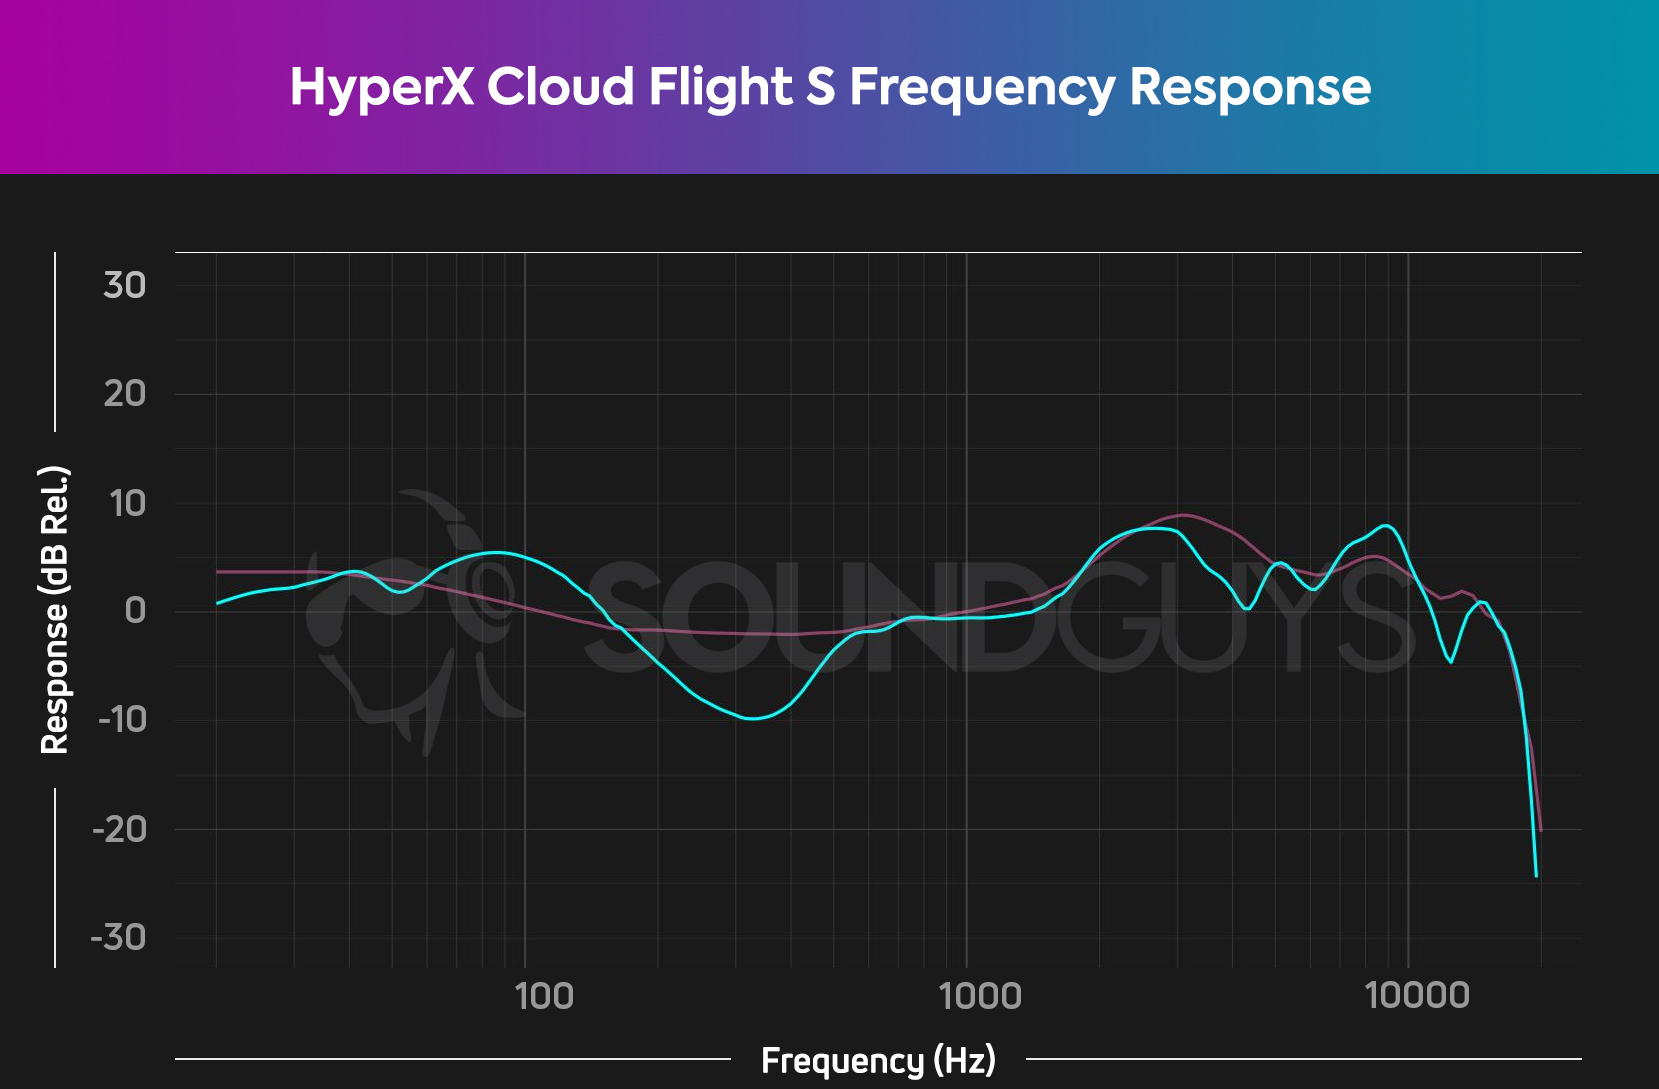 A frequency response chart for the HyperX Cloud Flight S gaming headset, which shows boosted bass and pronounced drop in the mids.